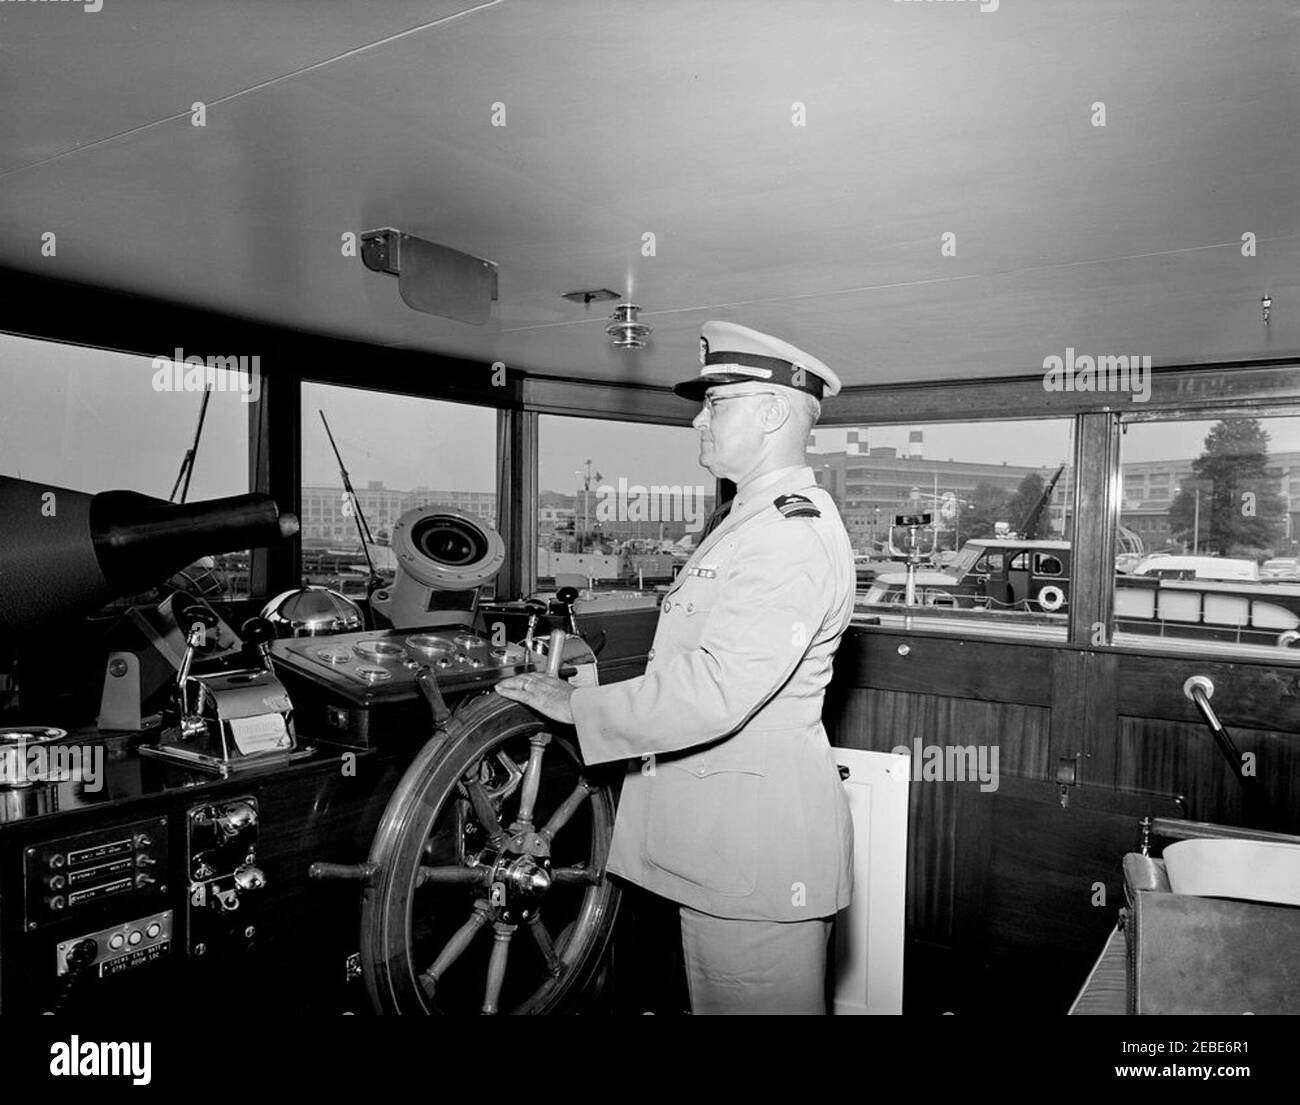 Yacht Honey Fitz berthed at Washington Navy Yard, interior and exterior views. Lieutenant Commander Walter C. Slye stands at the helm in the pilothouse of the Presidential yacht u0022Honey Fitzu0022 at the Washington Navy Yard, Washington, D.C. Stock Photo